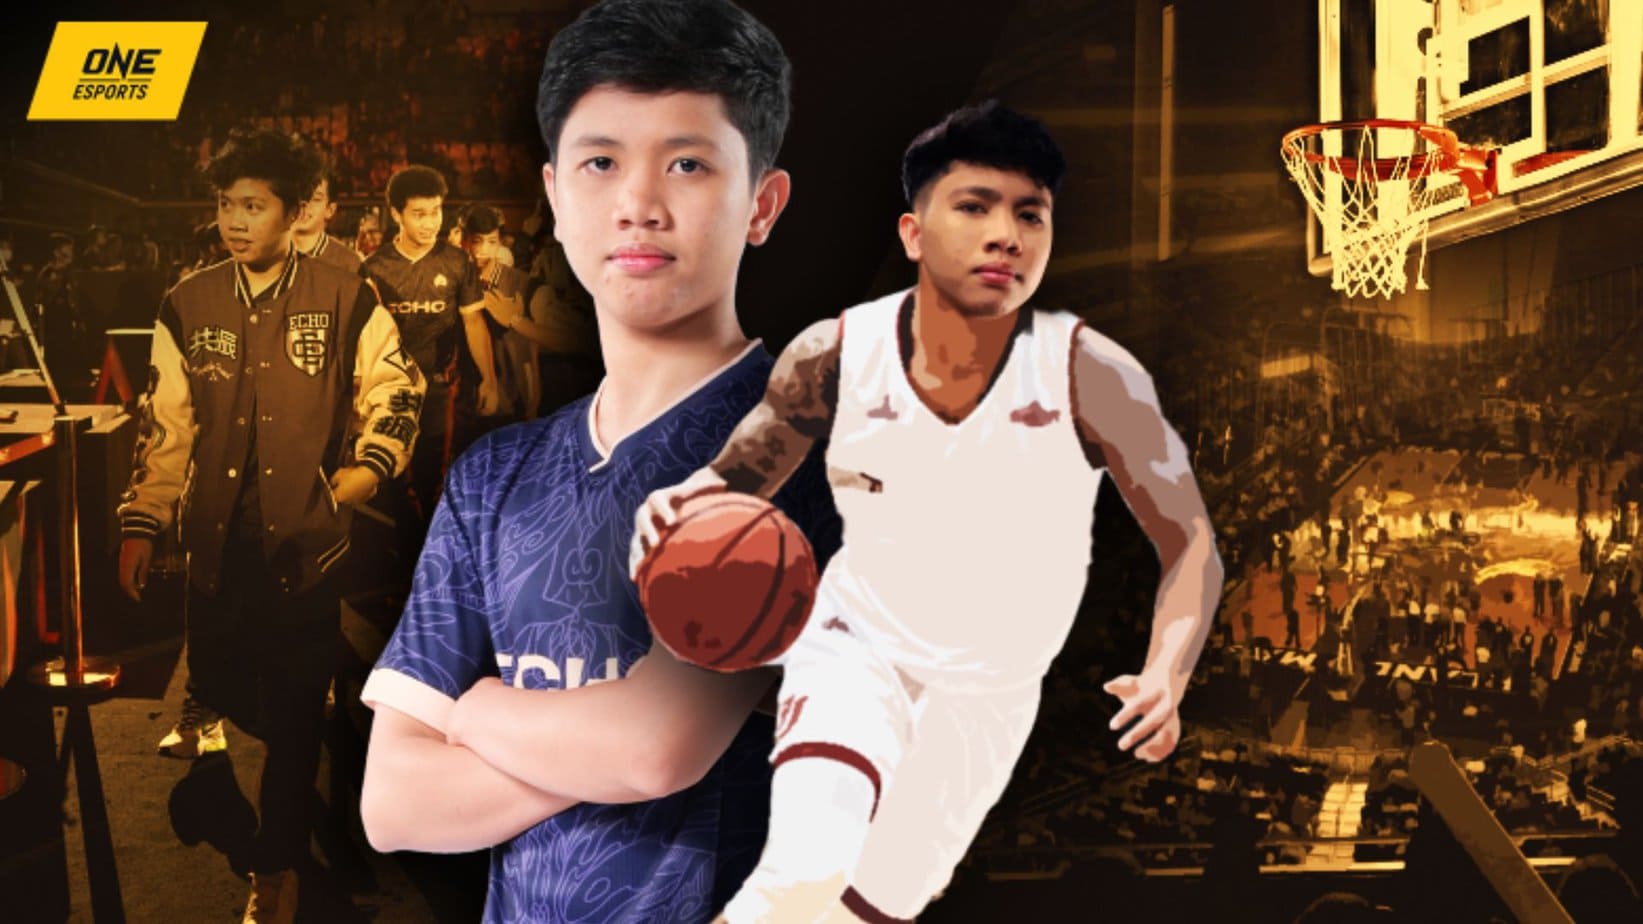 Exclusive: ECHO star Sanji would’ve gone pro in basketball if not for this life-changing moment - ONE Esports